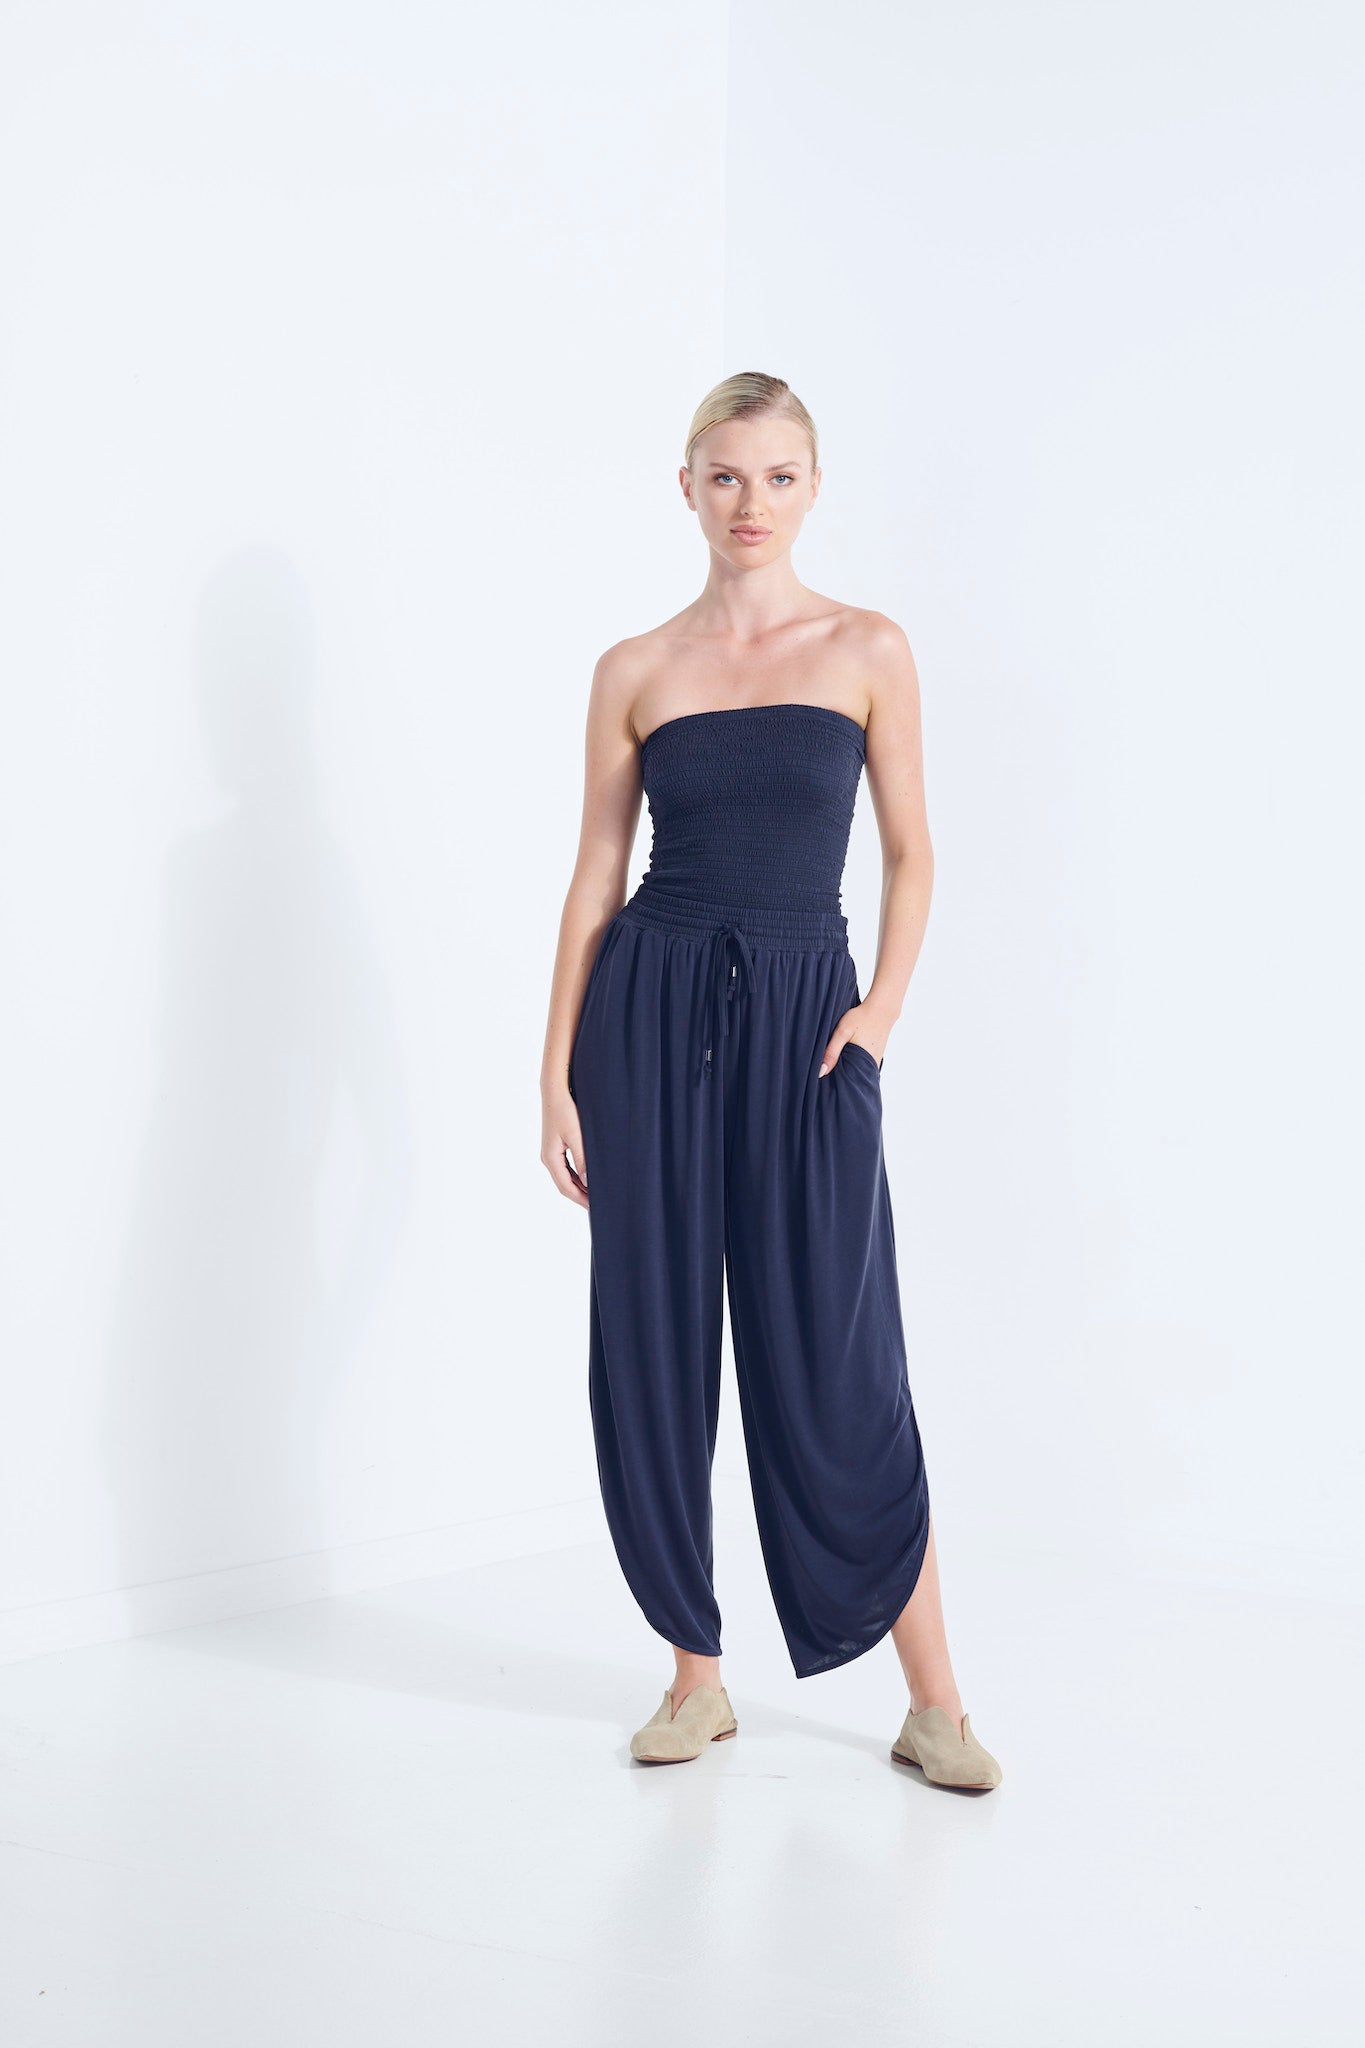 BELU PANT AEGEAN NAVY LUXURY LOUNGEWEAR RELAXED KNIT PANTS WITH ELASTIC WAIST AND PETAL HEM FRONT VIEW